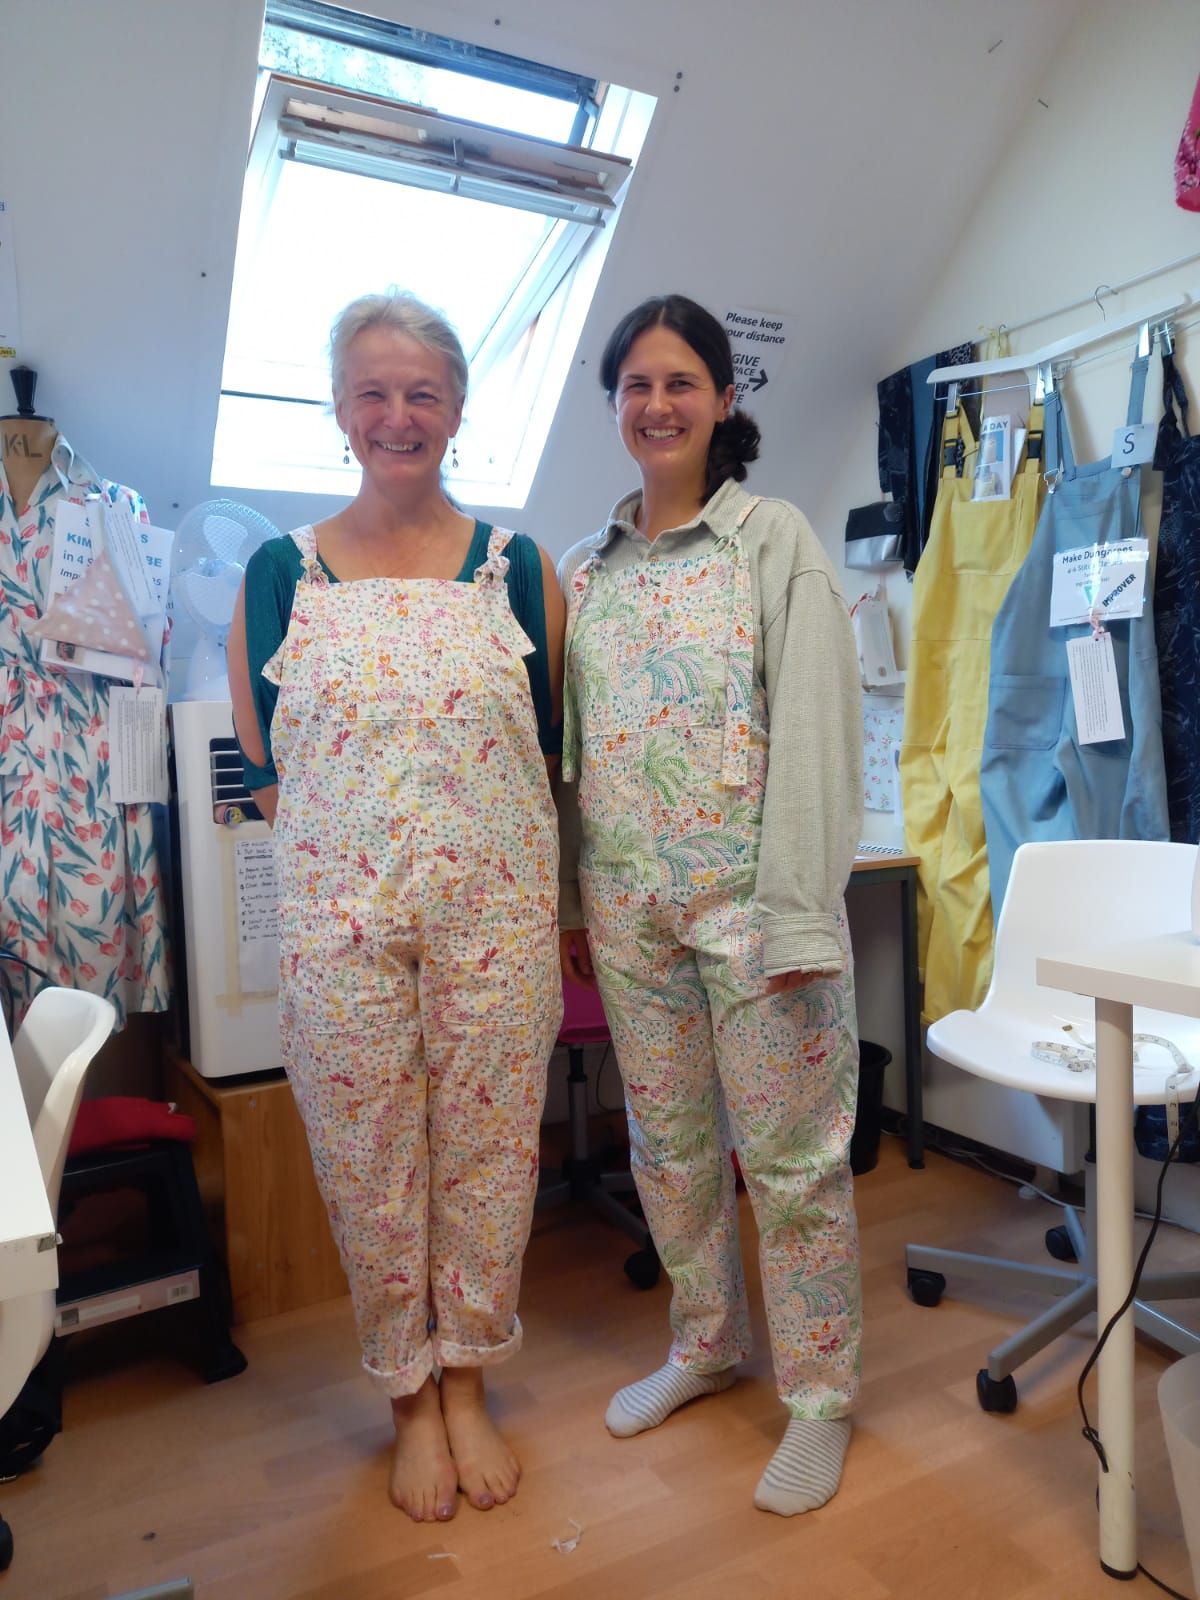 Dungarees sewn from old duvet covers on our Dungaree Sewing Workshop - also can make in Stitch Sessions. Brighton